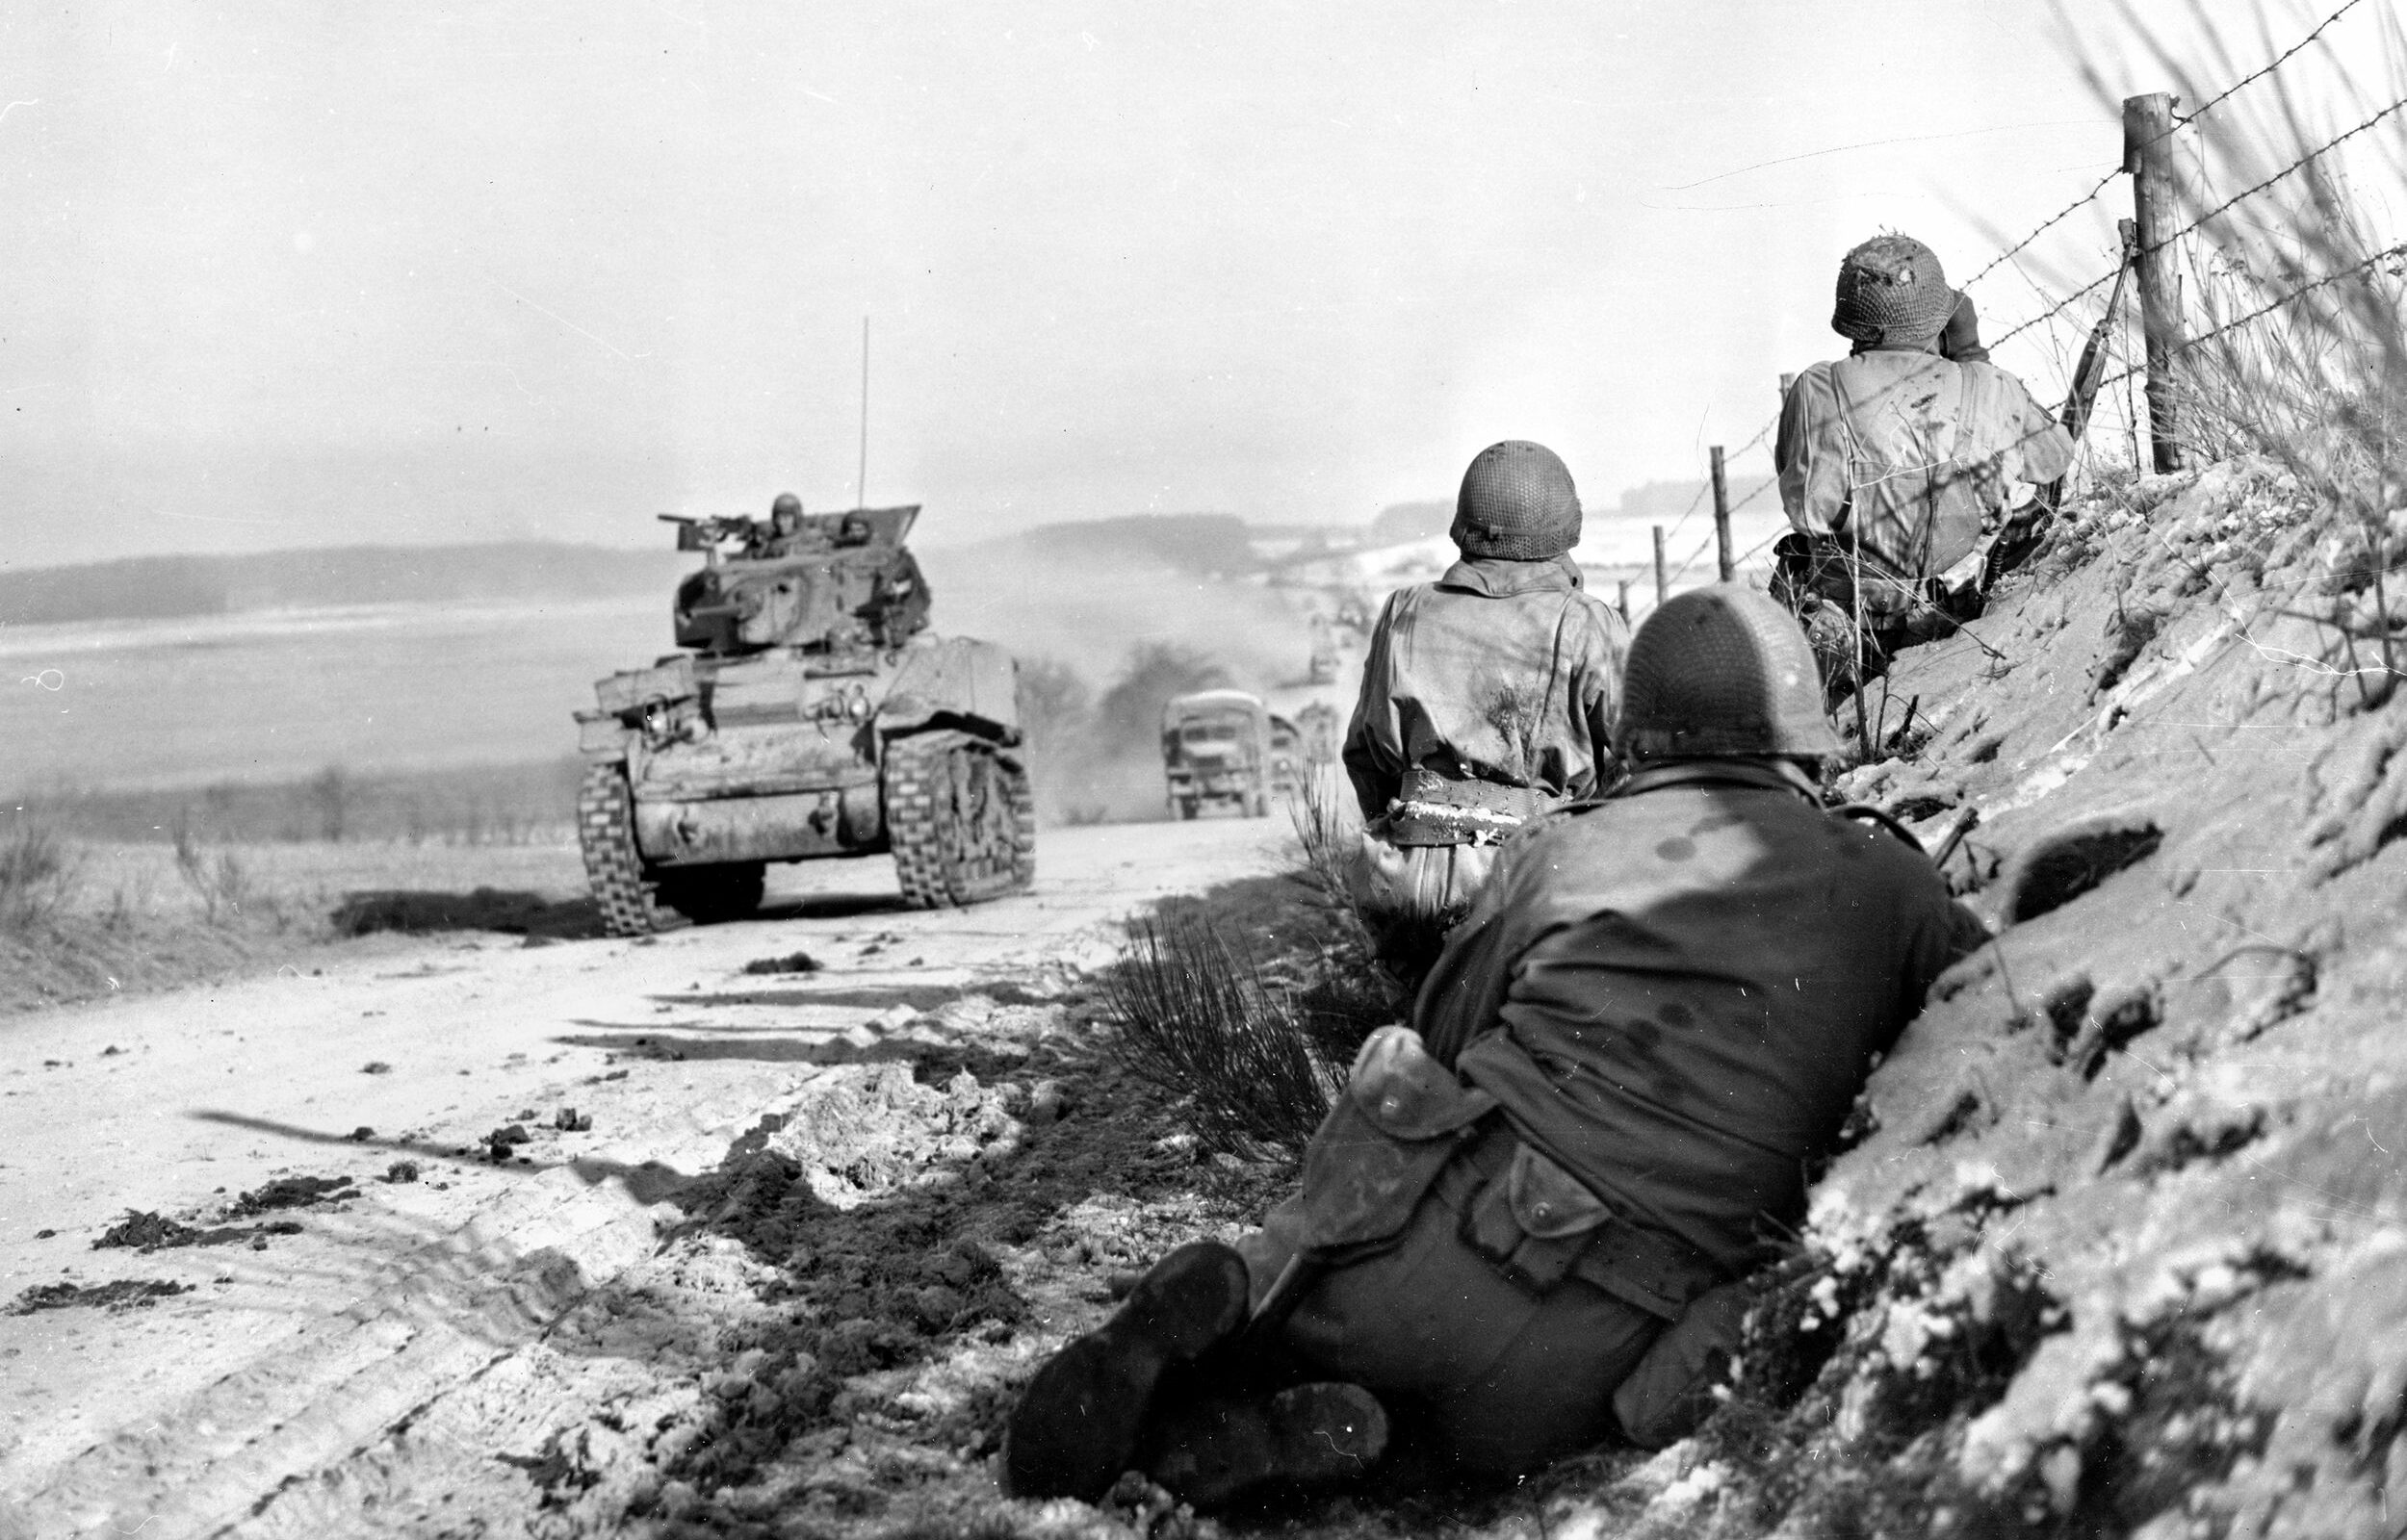 Infantrymen of the 4th Armored Division protect the flanks of a column of M4 Sherman medium tanks proceeding down a road toward Bastogne. German infantrymen were sometimes seen to emerge from cover and fire the Panzerfaust anti-tank weapon at American armored vehicle.